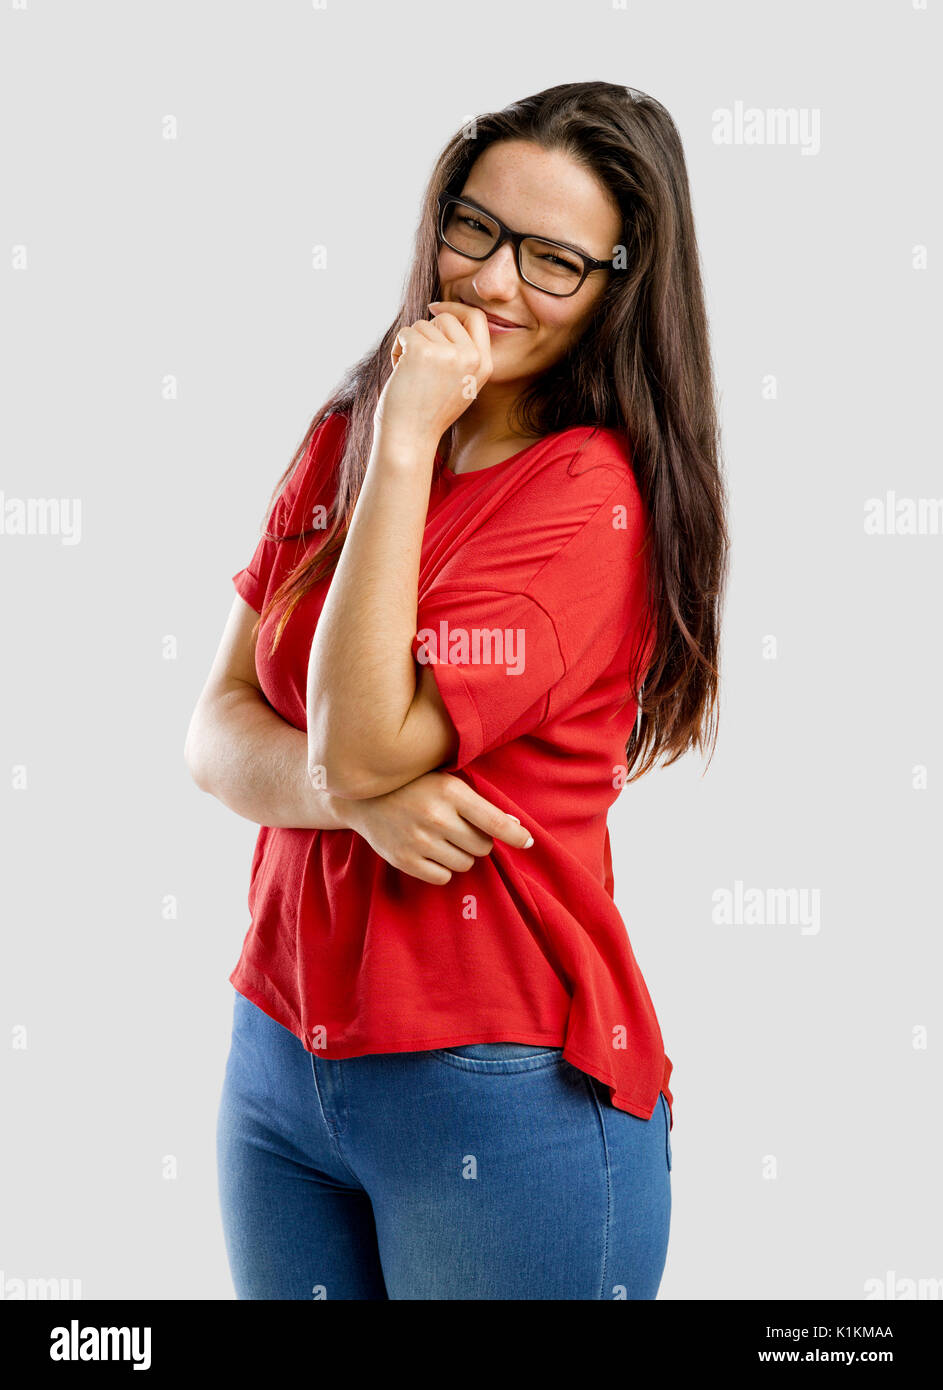 Lovely and happy woman with a shy expression Stock Photo